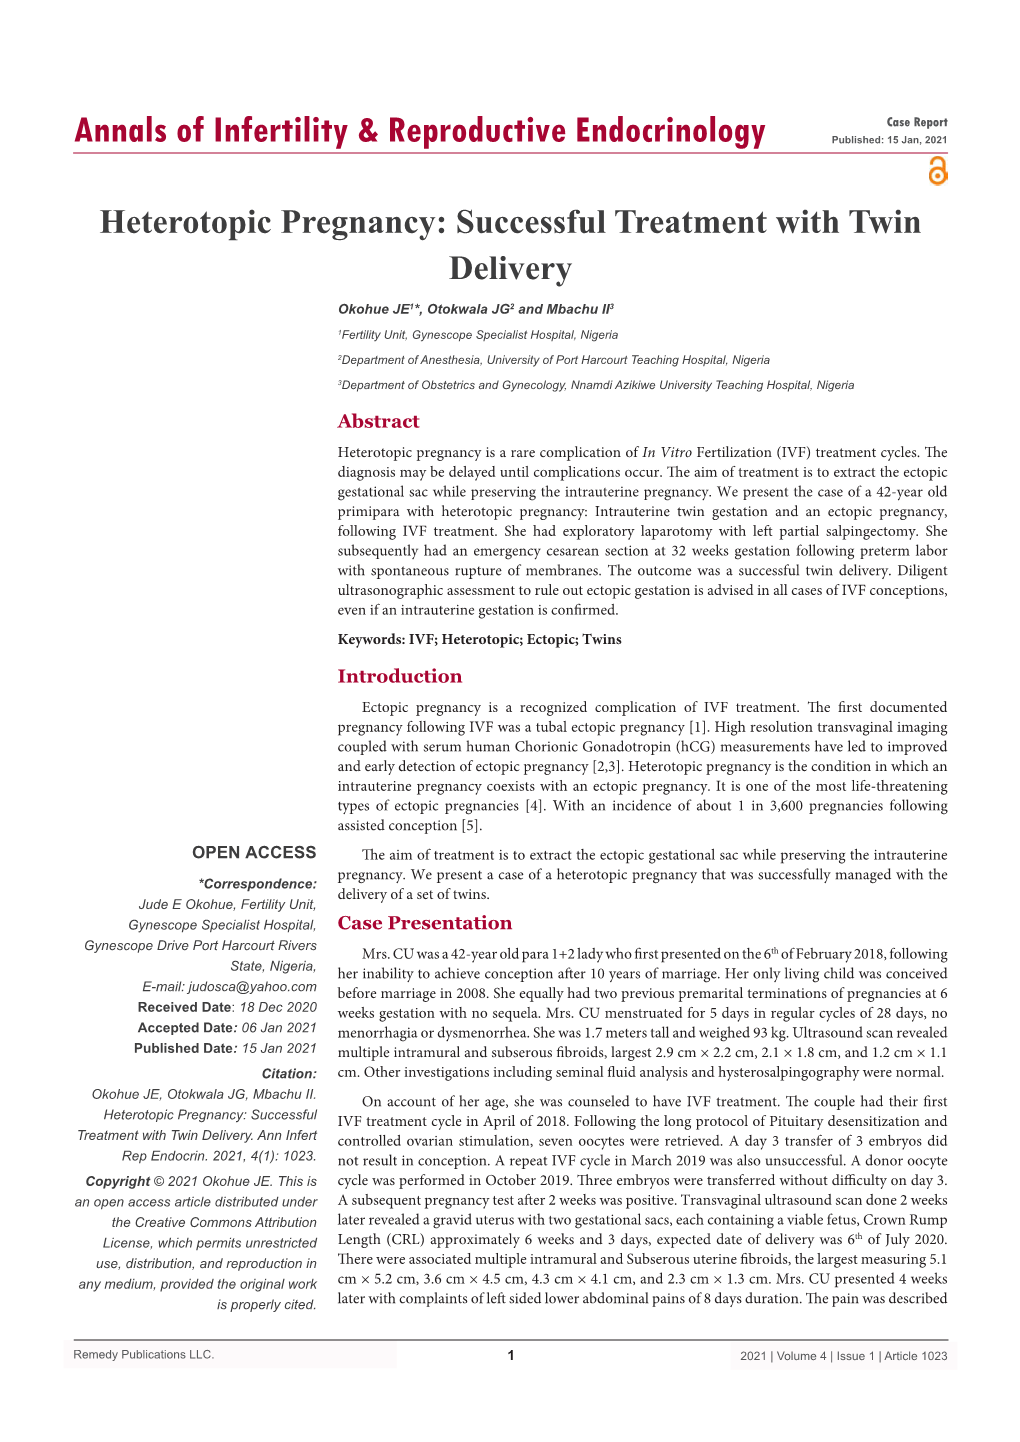 Heterotopic Pregnancy: Successful Treatment with Twin Delivery